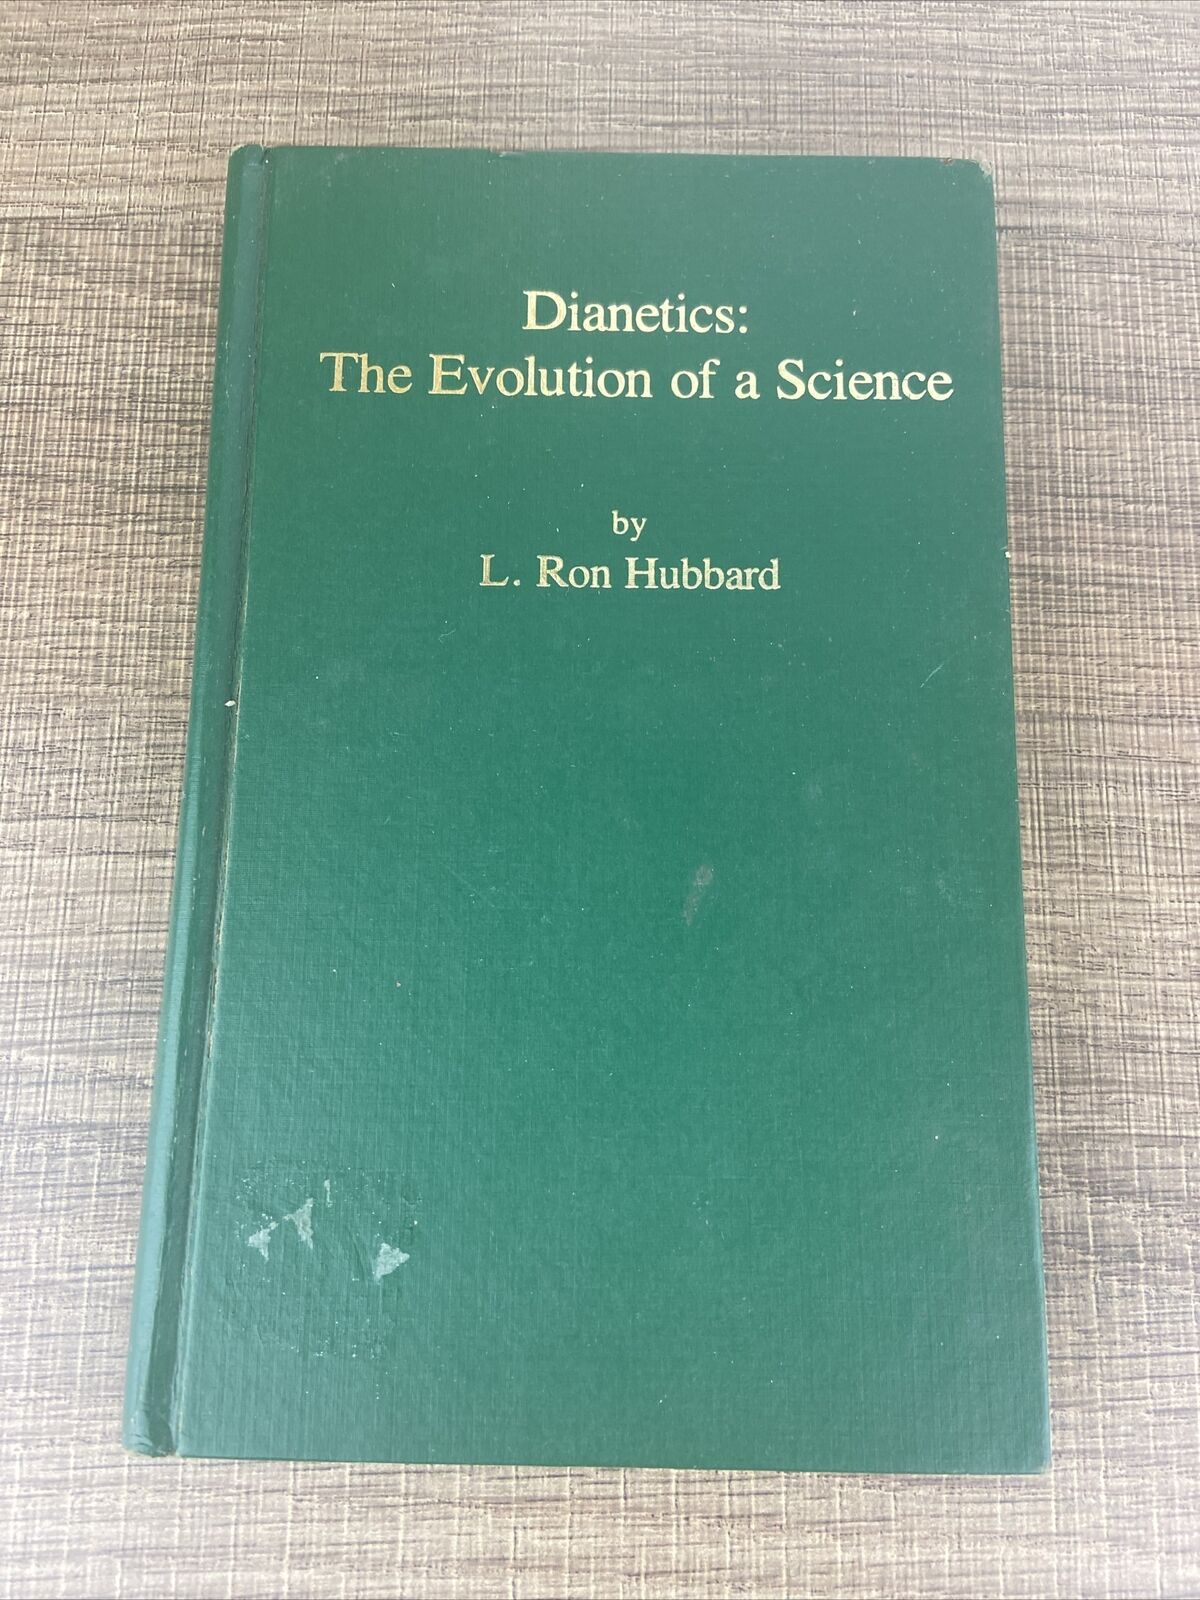 DIANETICS  THE EVOLUTION OF A SCIENCE L. Ron Hubbard 1975